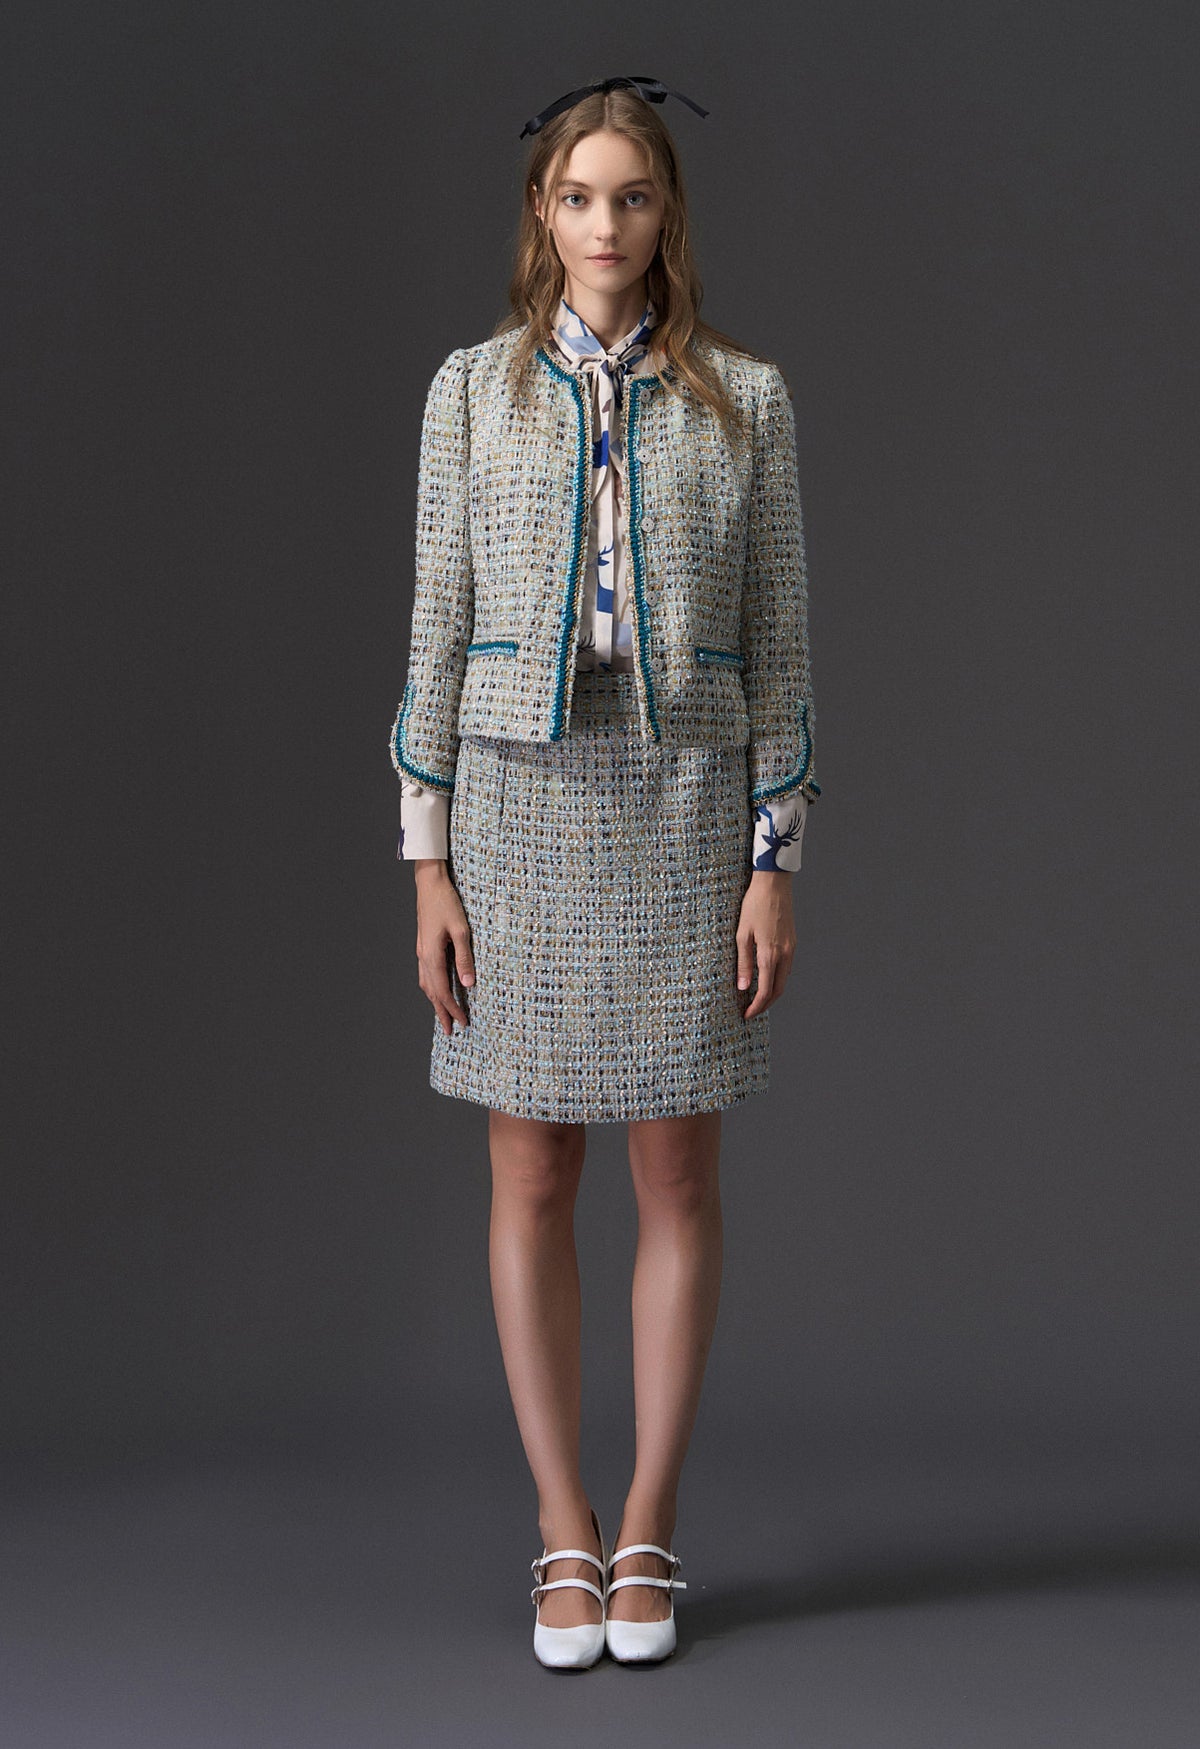 Earth Tone Blue And Gold Detailing Tweed Jacket - MOISELLE